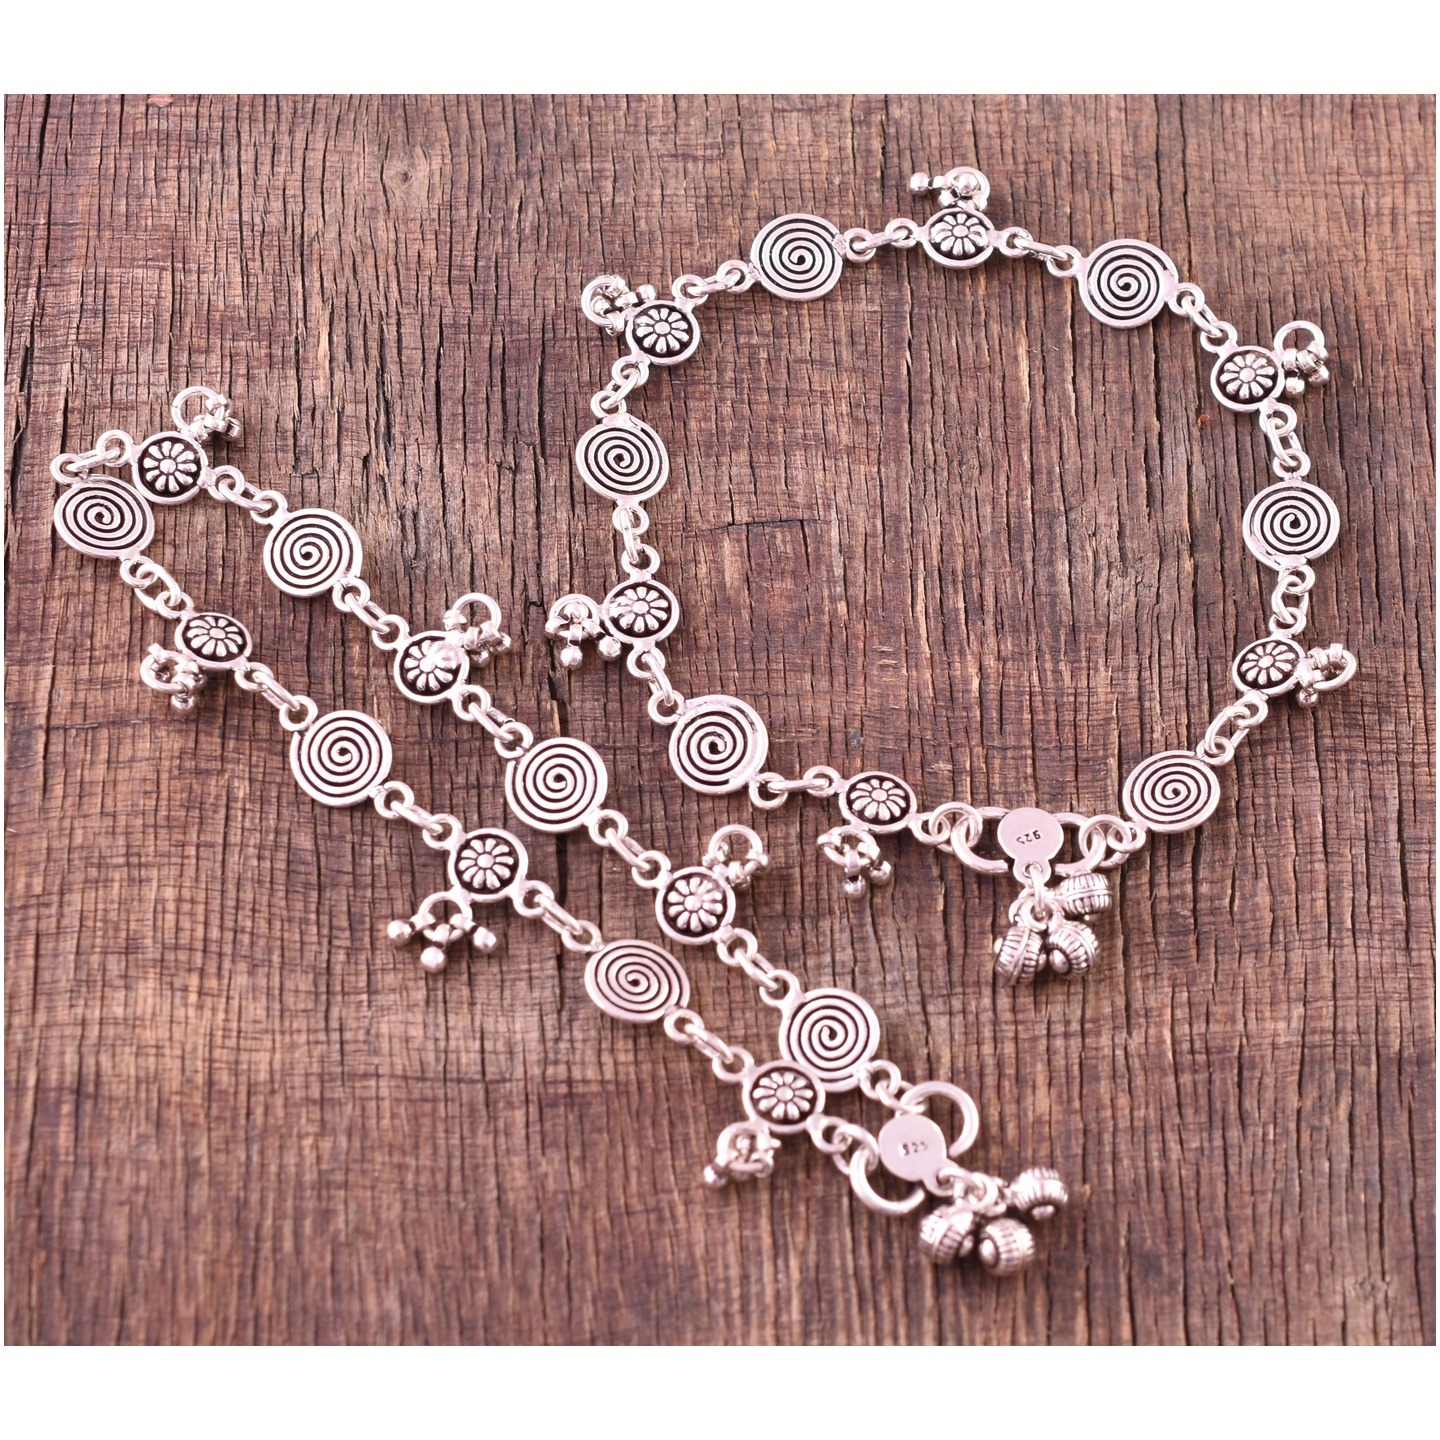 925 Solid Sterling Silver Flower Anklet - Length 10.5 Inches - Silver Oxidize Anklet - Spiral Chain Anklet - Flower Beaded Anklet